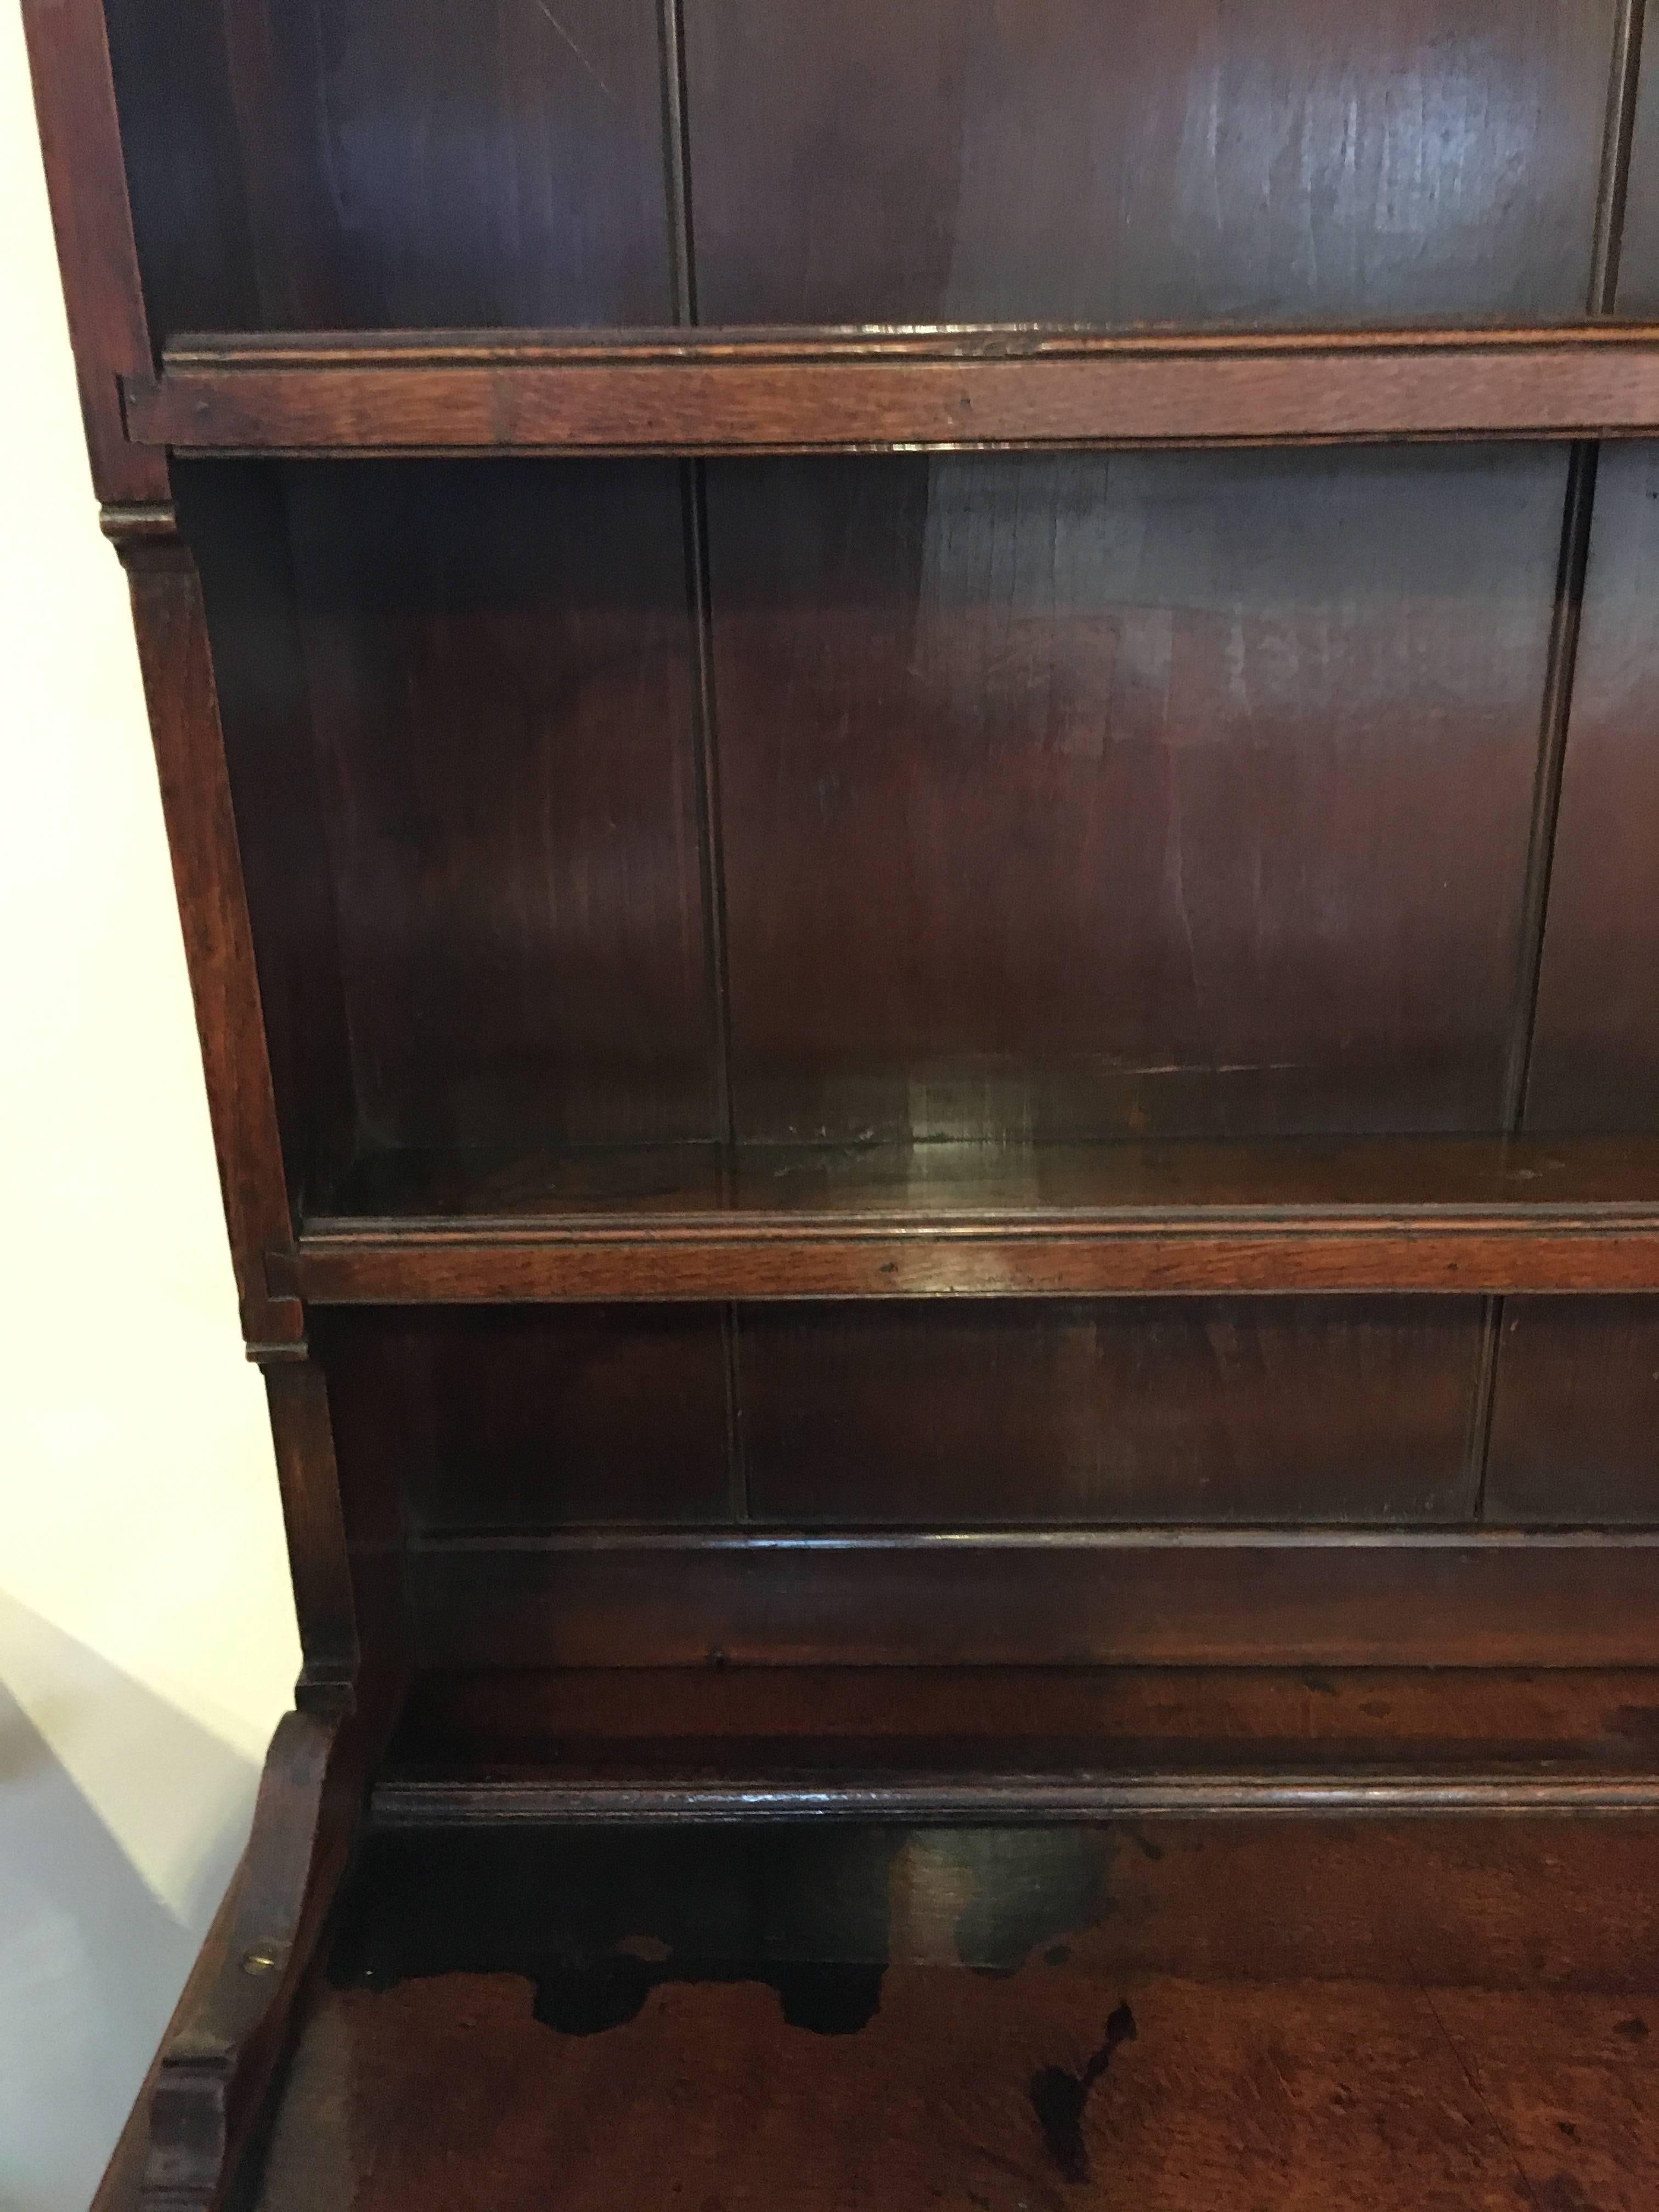 Good Welsh oak dresser dating to circa 1850

Lovely color / patination, unusual potboard design 

This piece has been through our workshops. Been cleaned polished and is ready to be placed in your home 

Measures: Height 86 inches 
Width 72